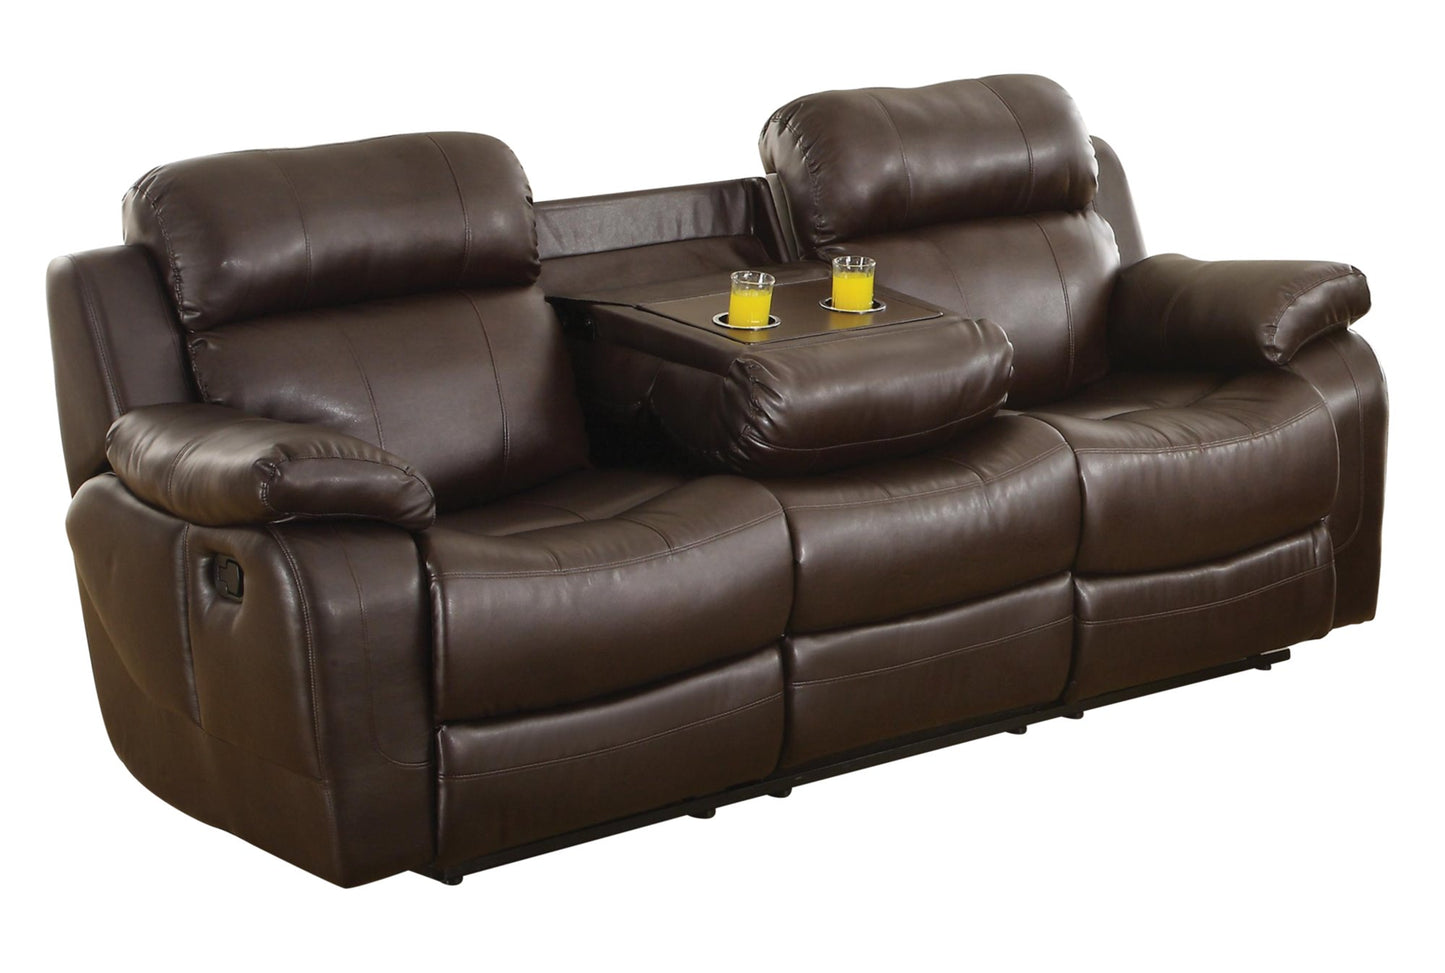 Homelegance Marille2PC Set Double Reclining Sofa & Love Seat with Console in Leather - Dark Brown